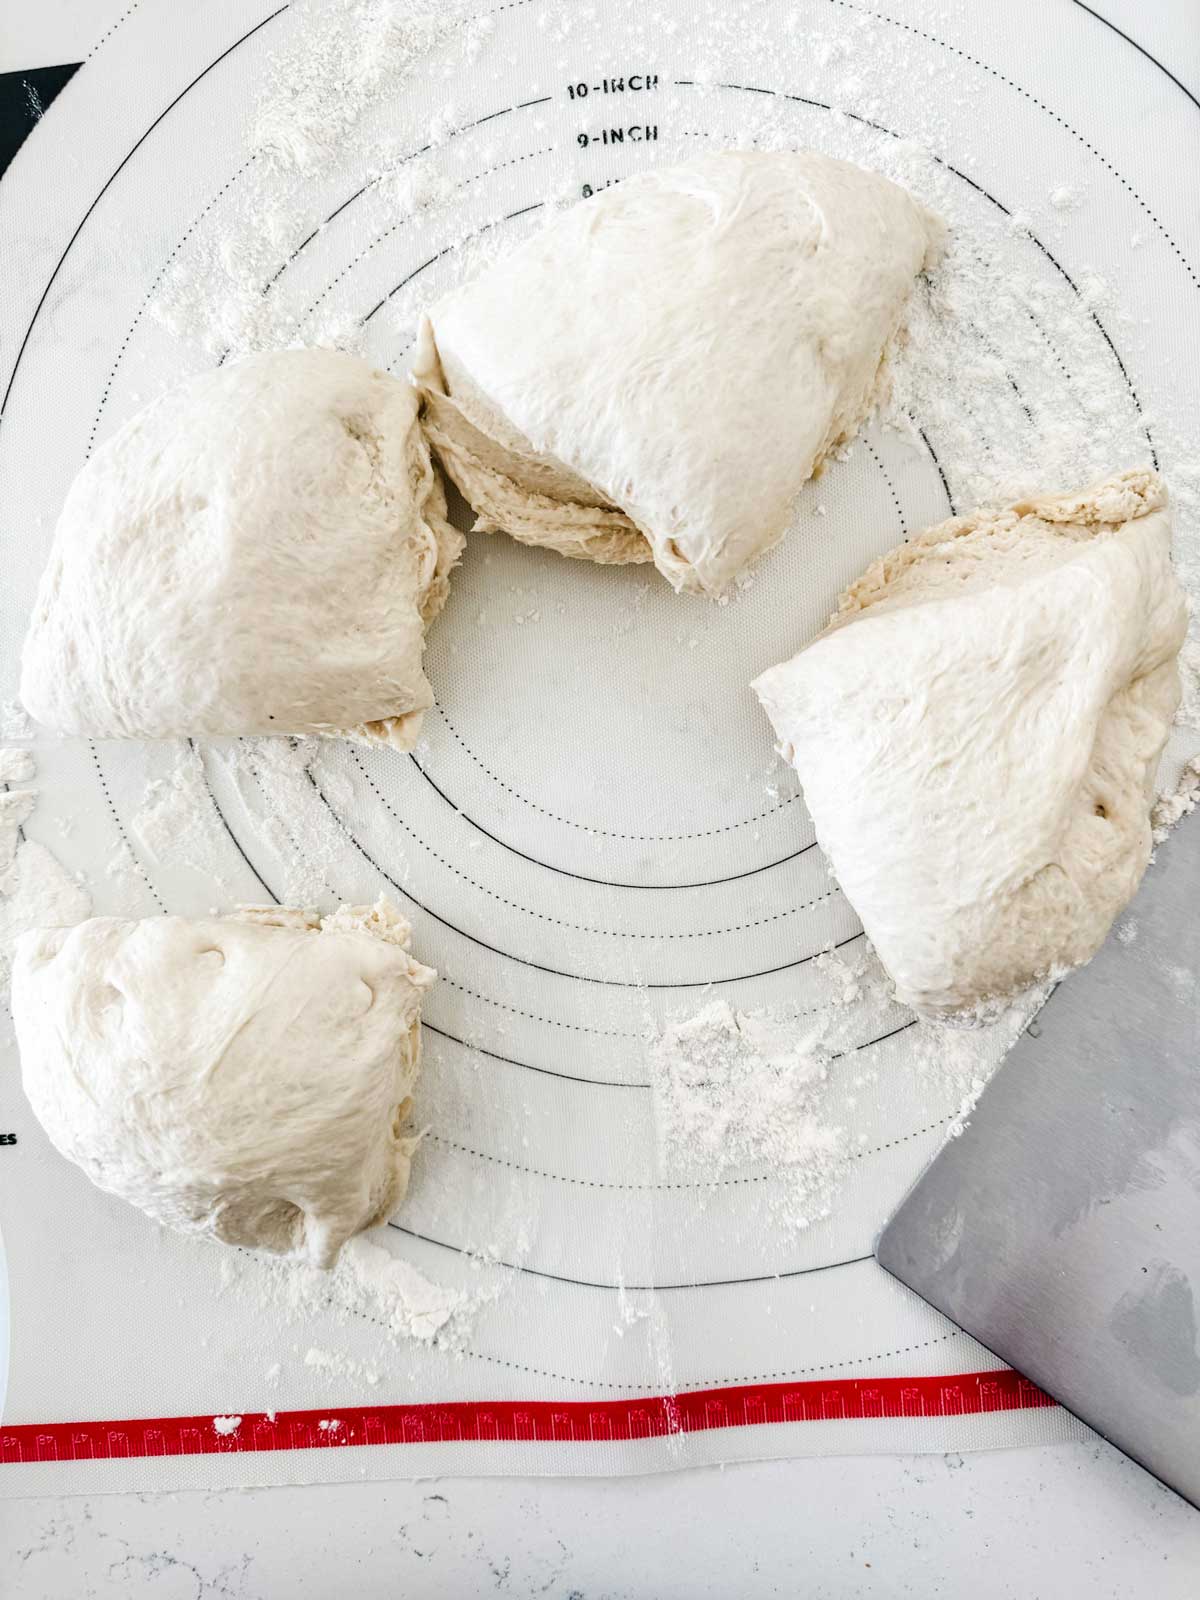 Photo of pizza dough divided into quarters with a pastry knife.